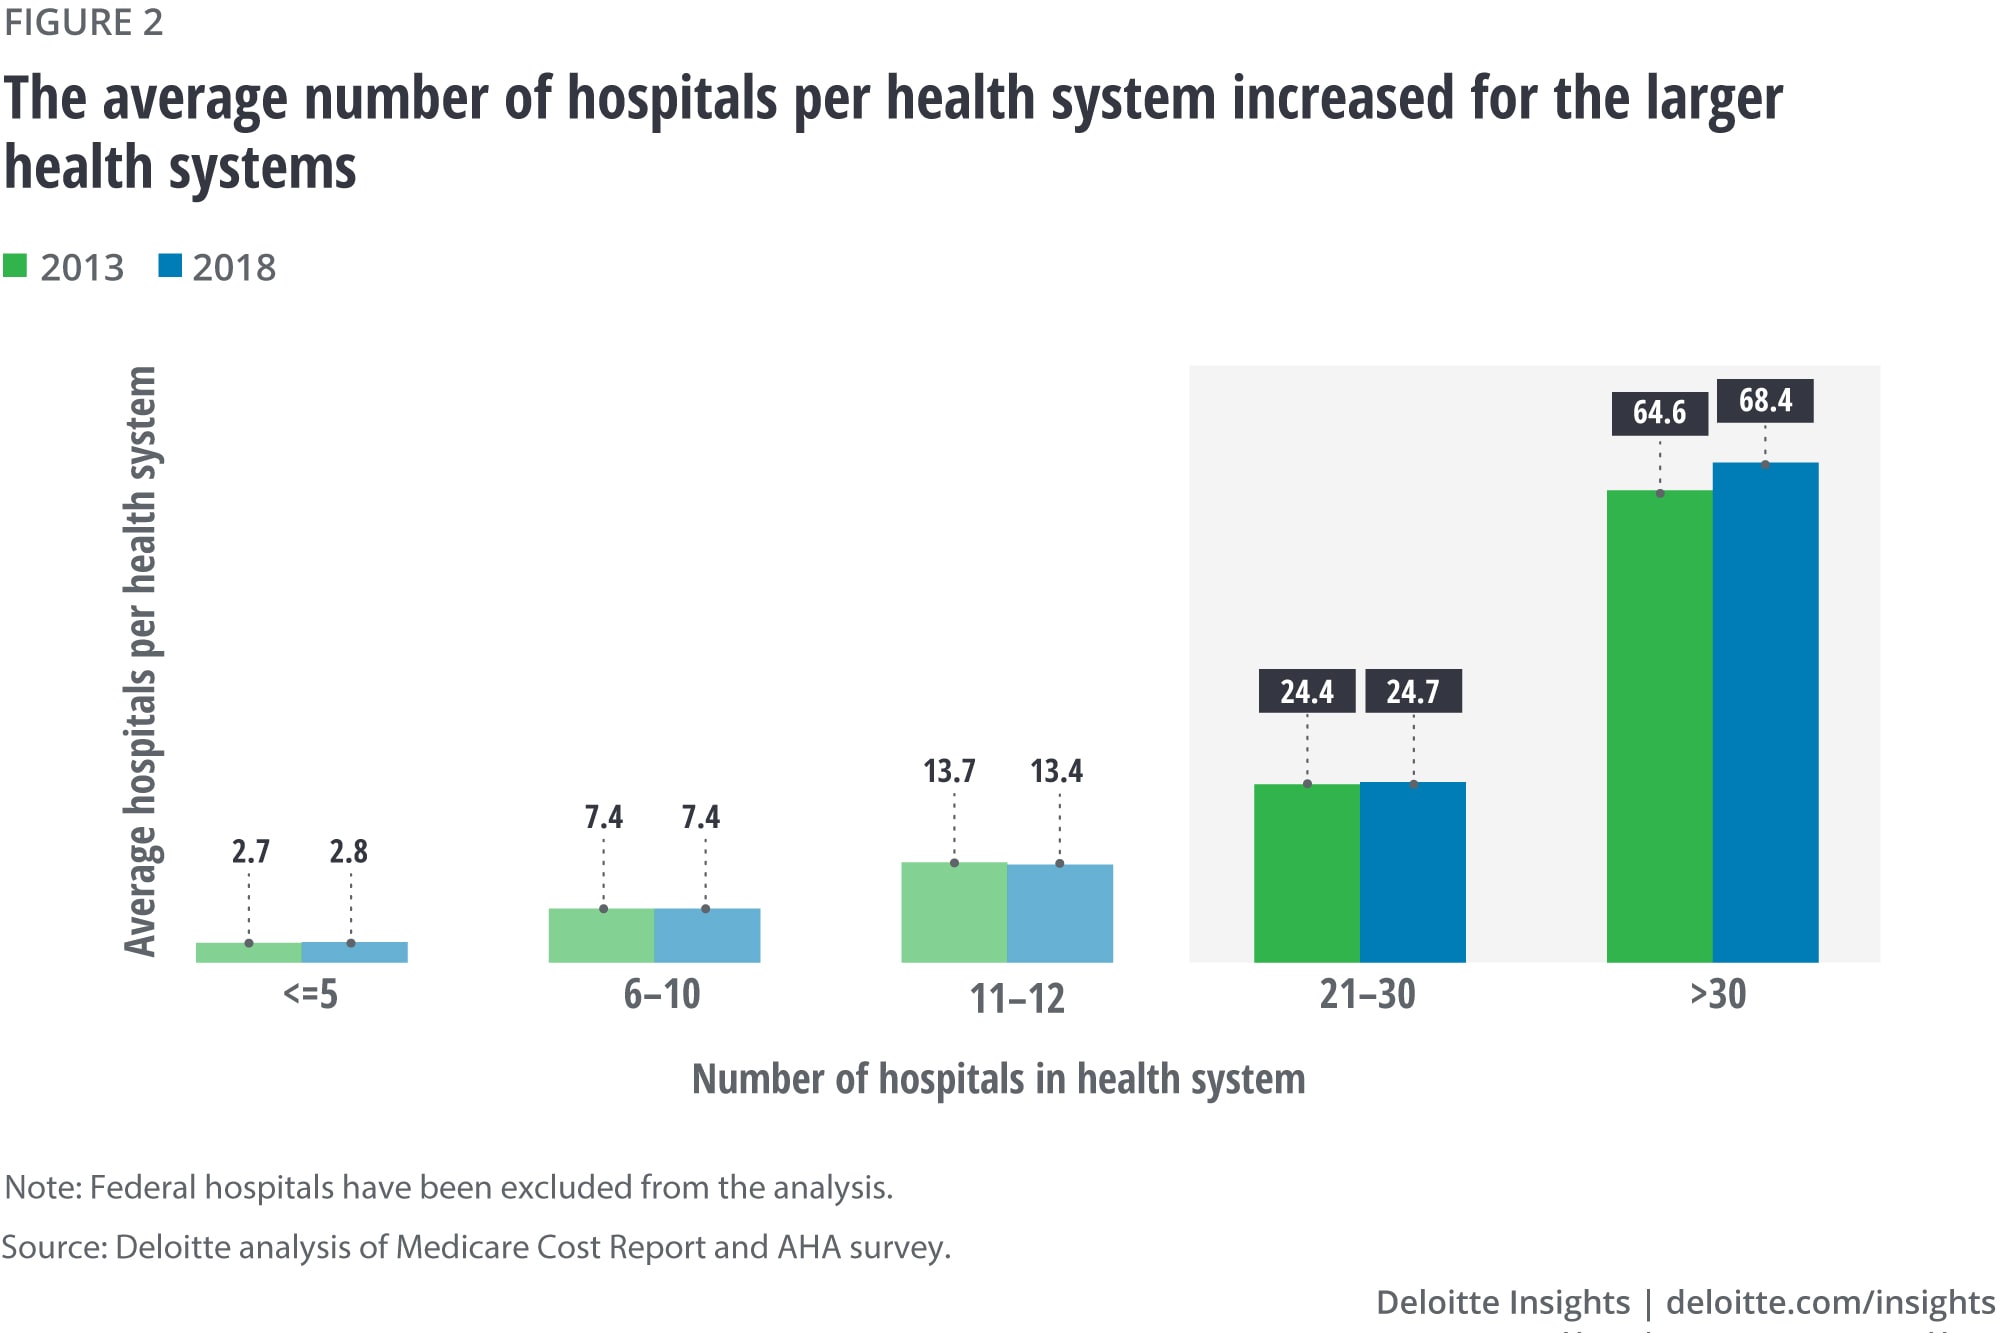 The average number of hospitals per health system increased for larger health systems